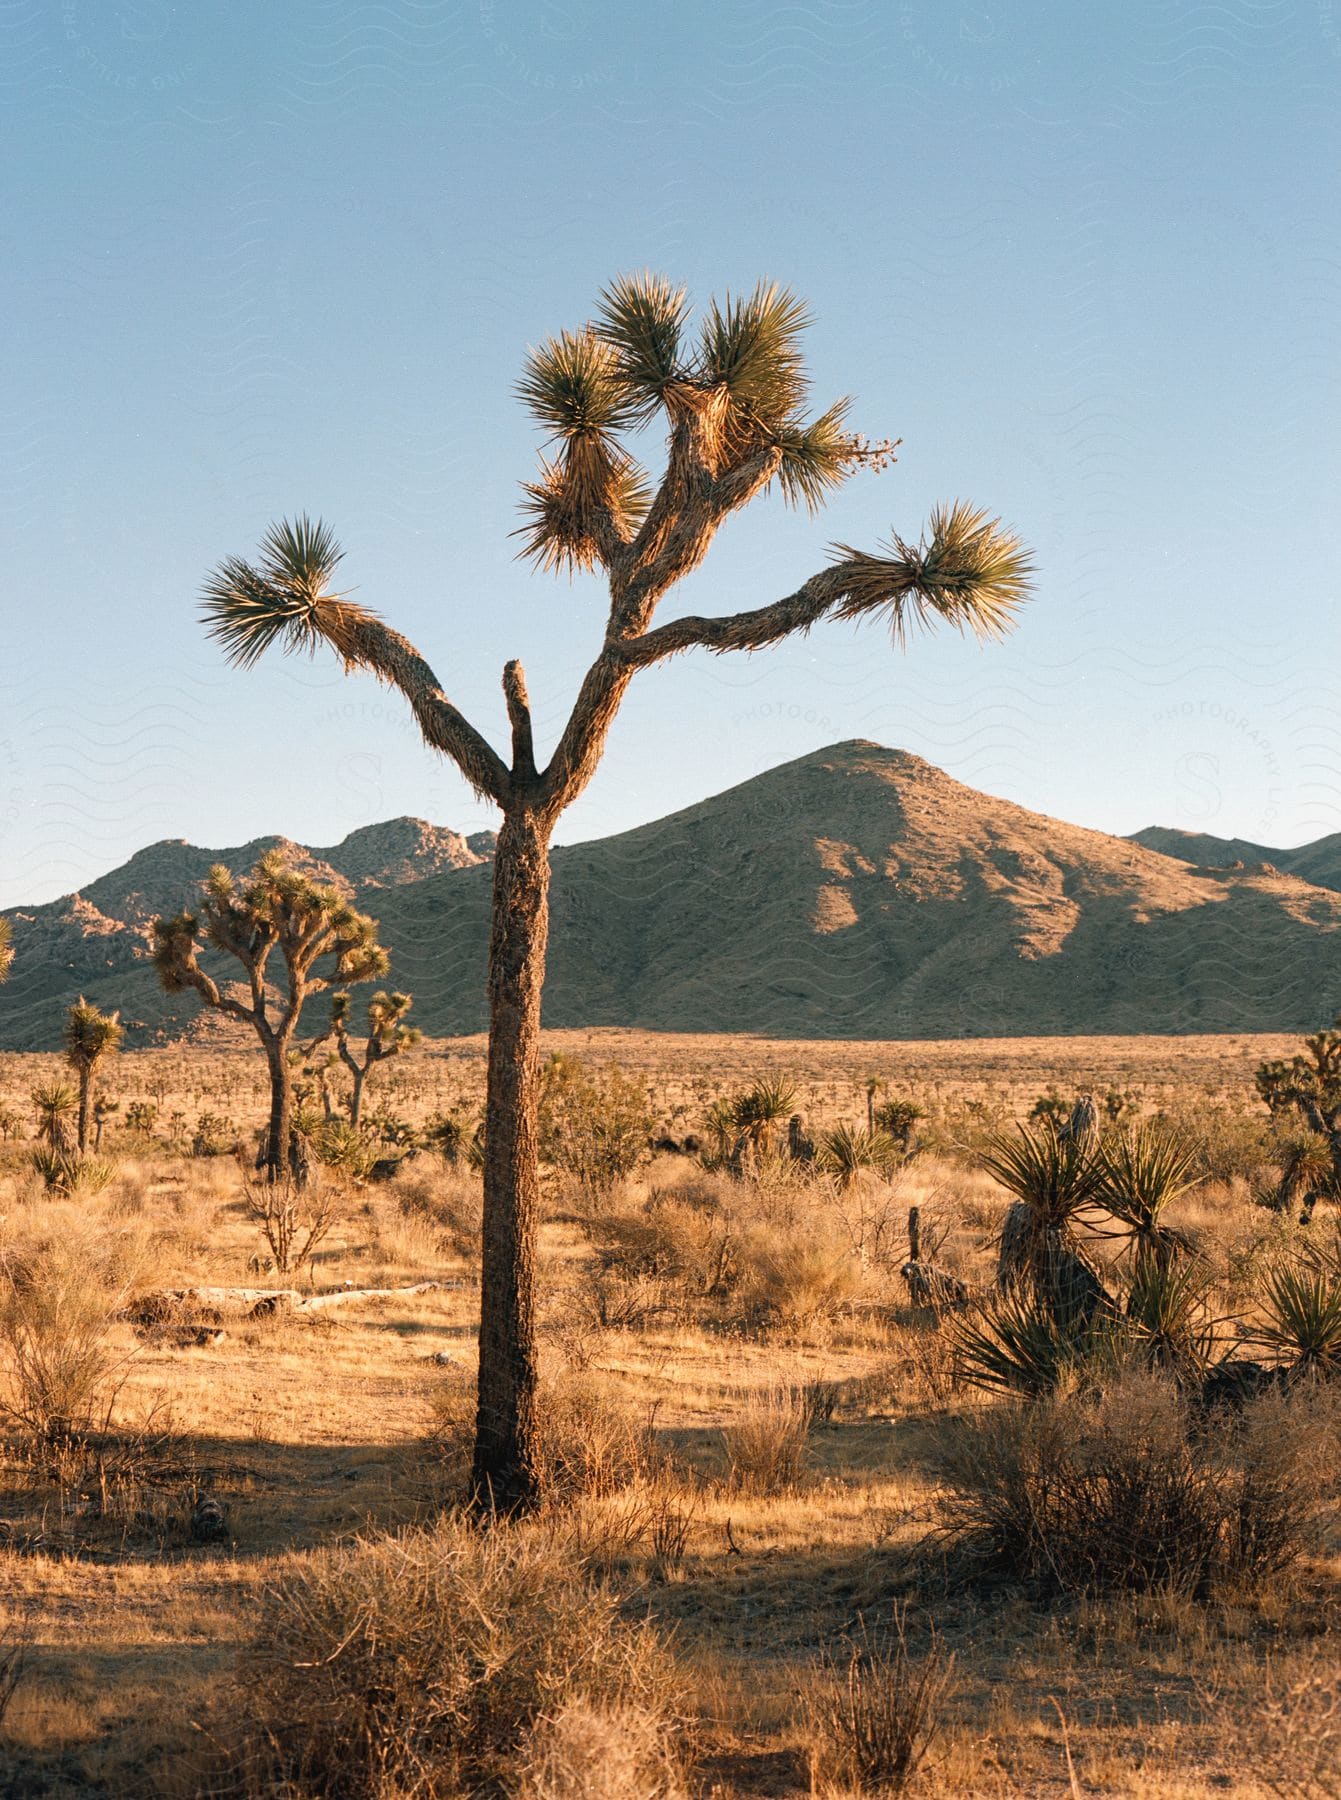 Joshua trees stand in the desert with mountains in the distance